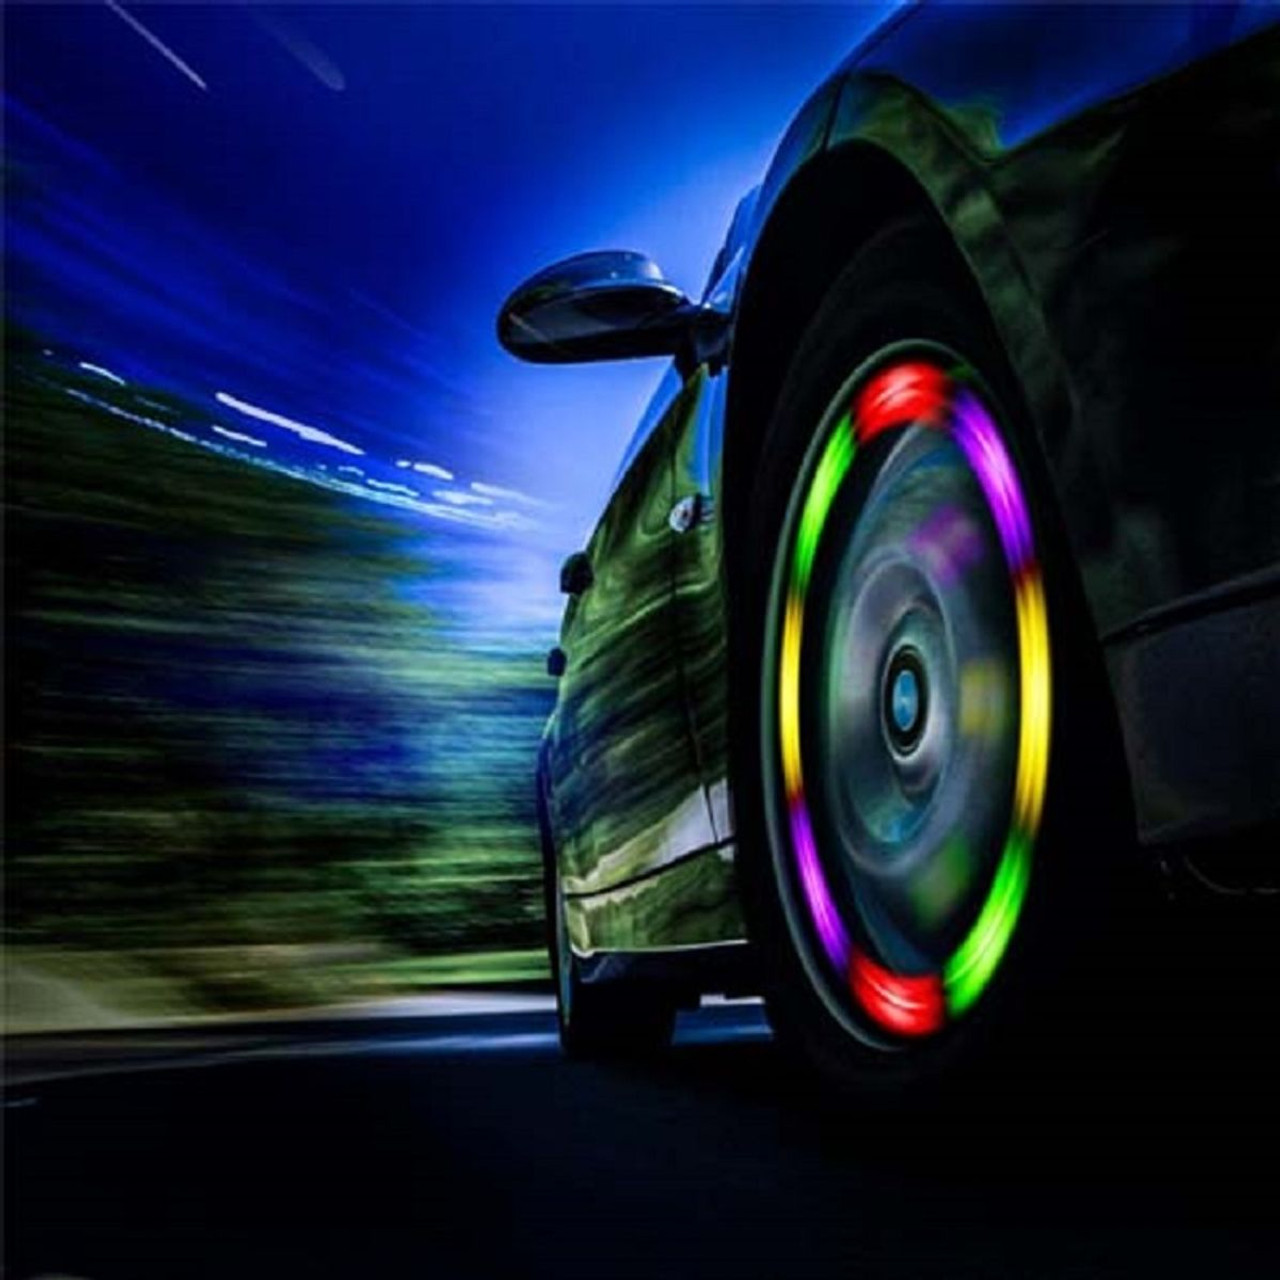 Multi-Color LED Tire Light (4-Pack) product image